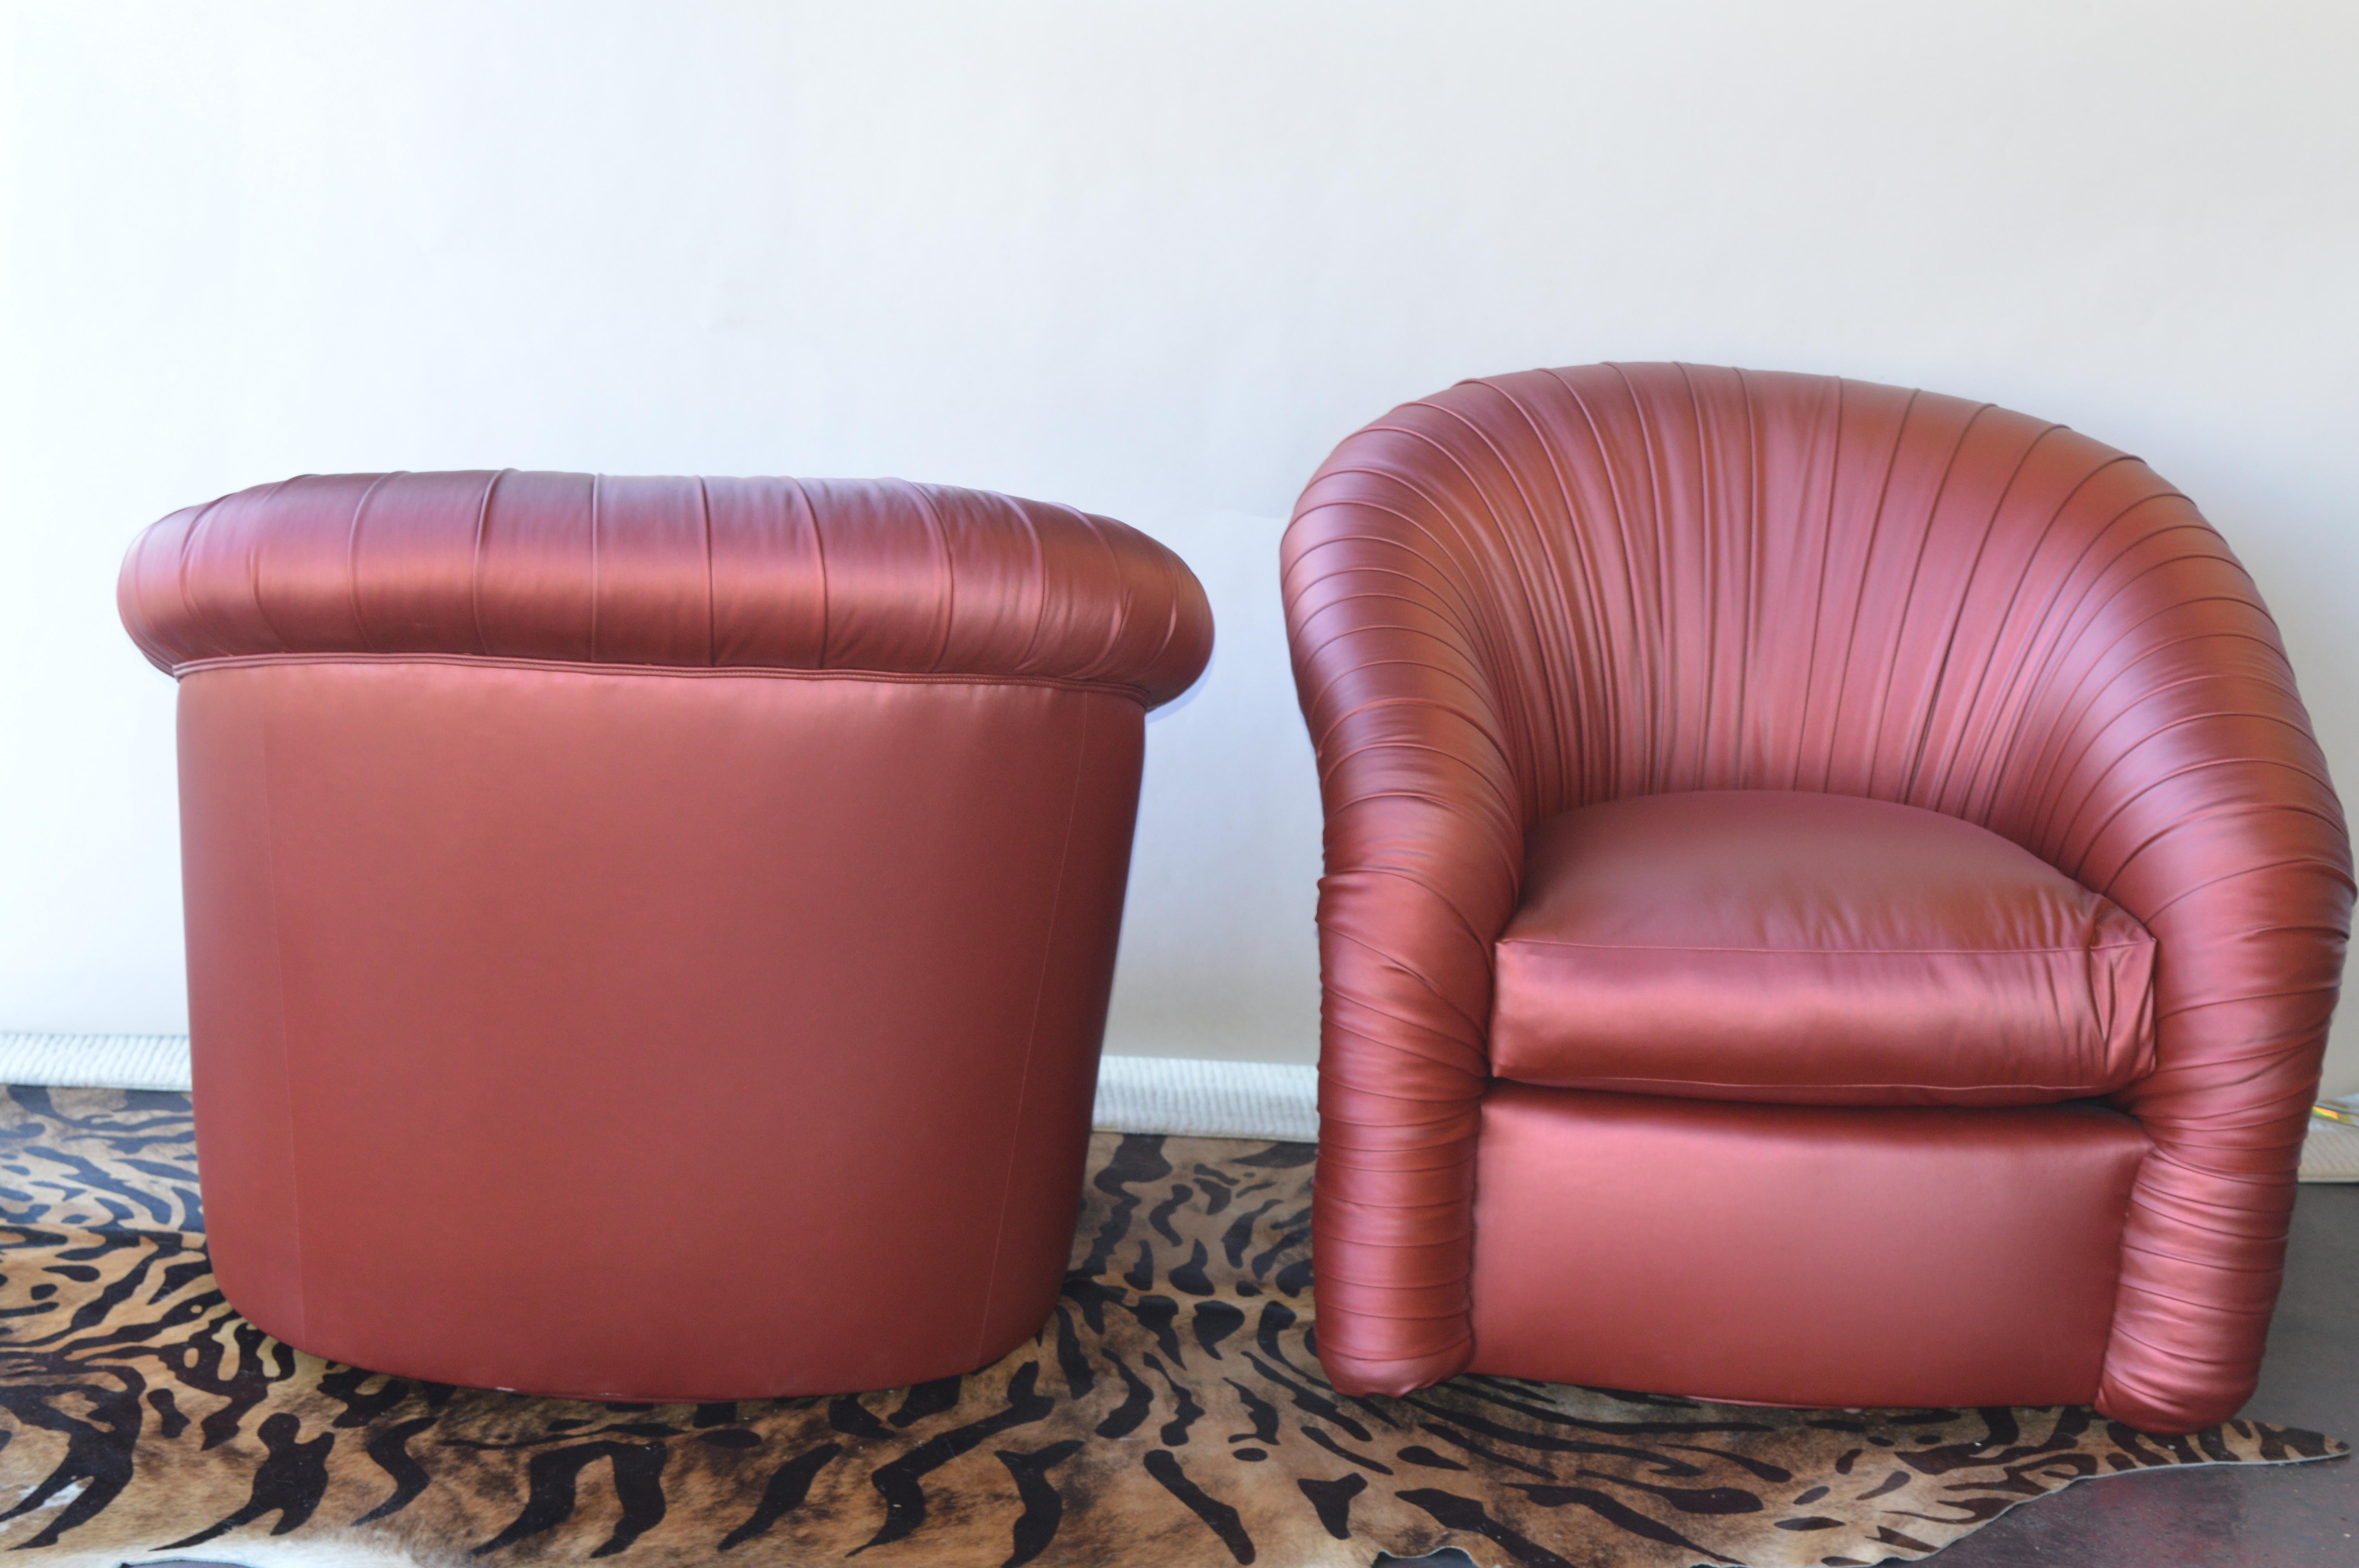 Pair of swivel chairs in an iridescent red latex.